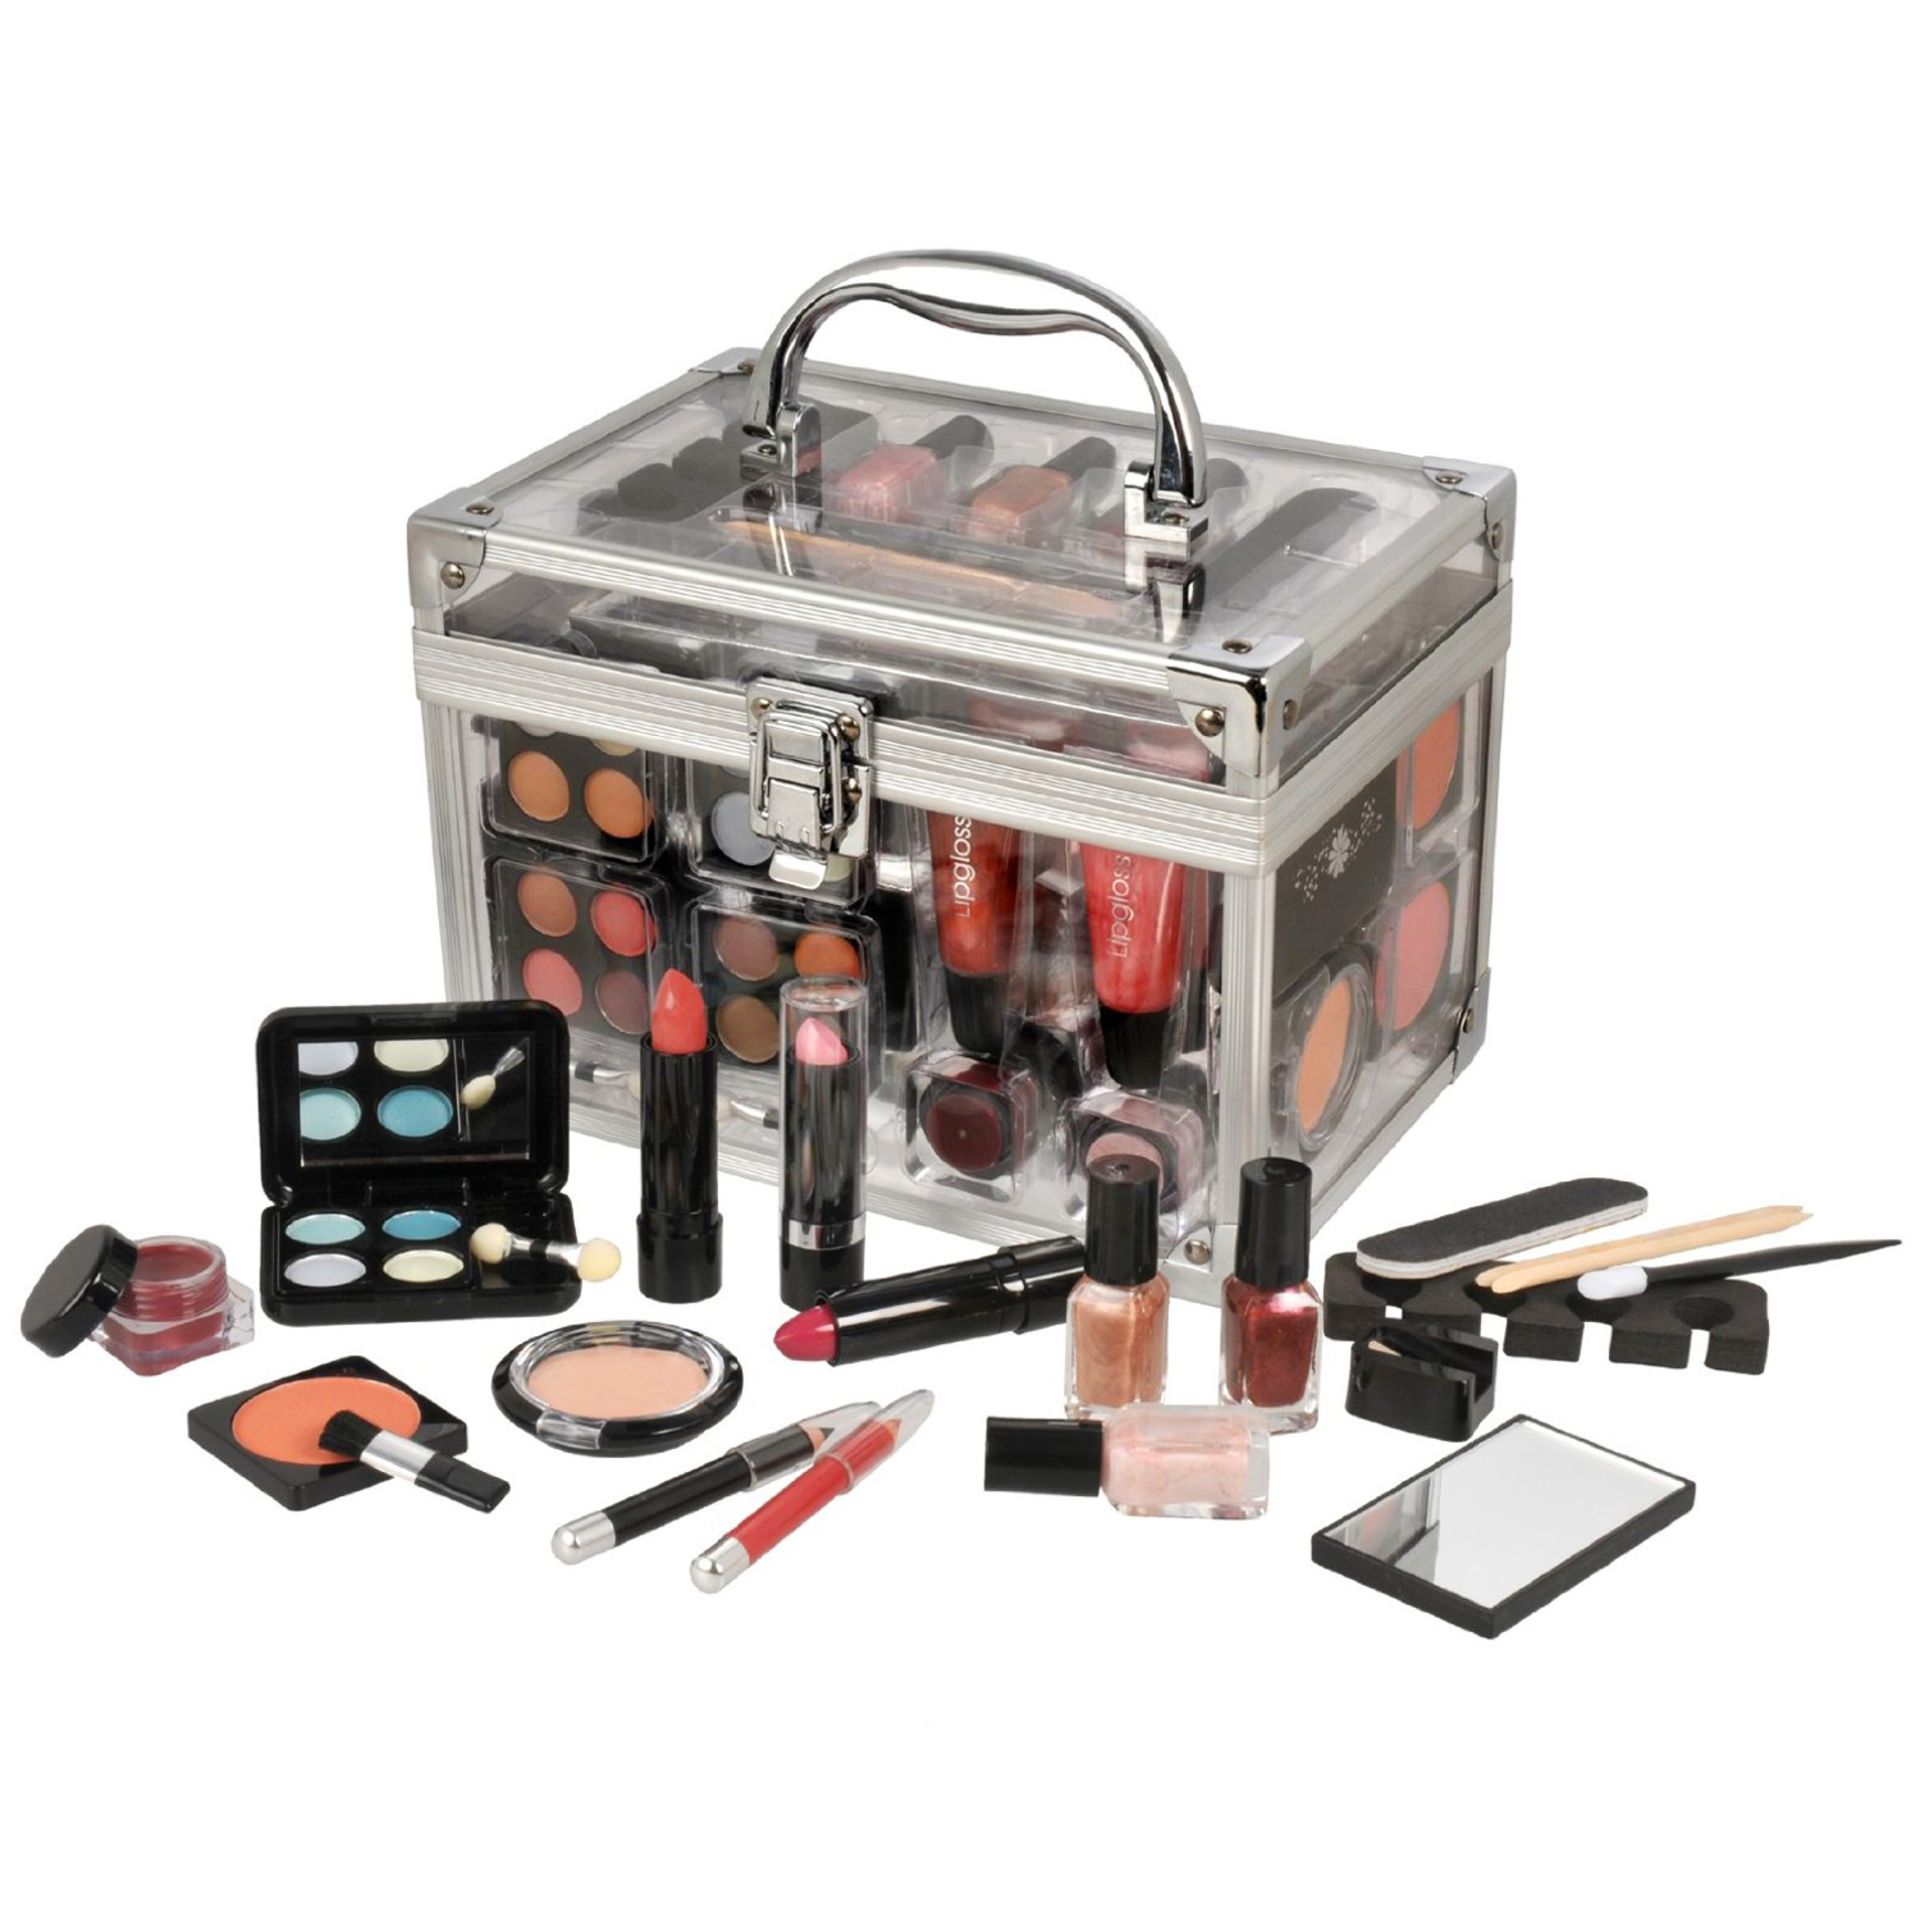 V *TRADE QTY* Brand New Ladies 42 Piece Cosmetic Set In Aluminium/Clear Travel Case RRP £29.95 X 5